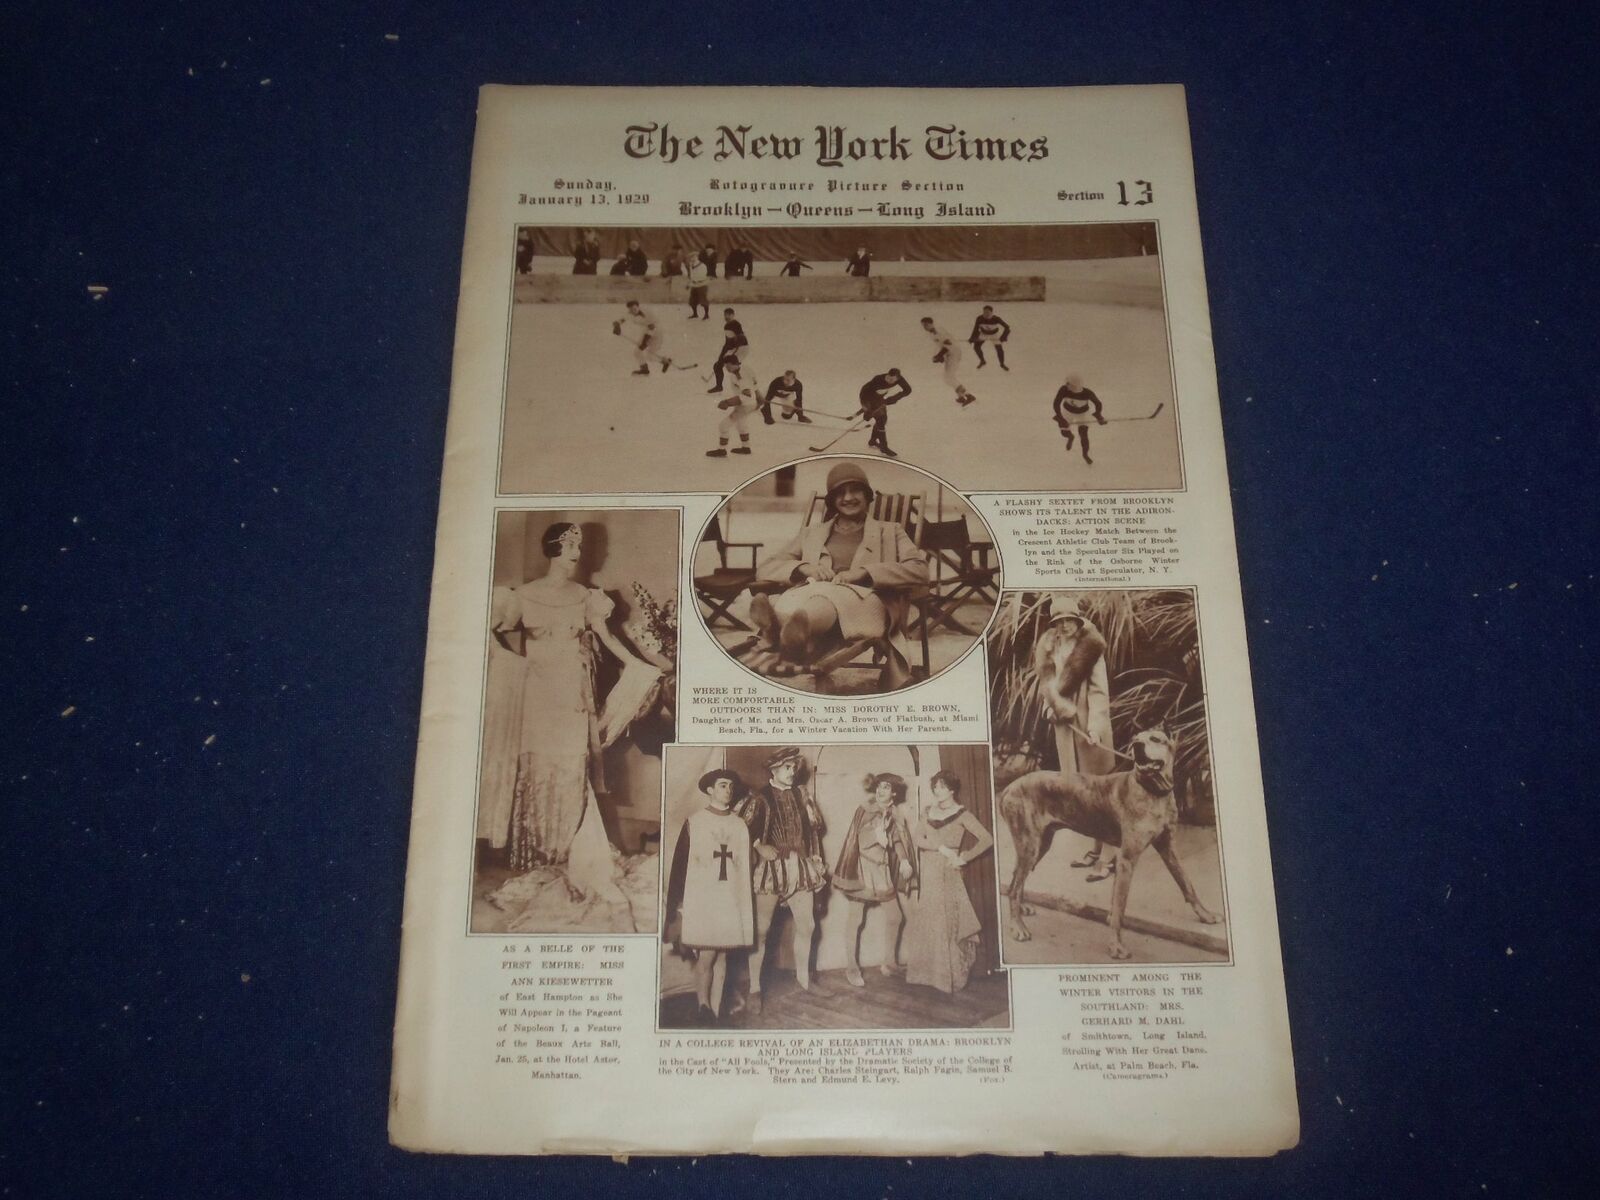 1929 JANUARY 13 NEW YORK TIMES BKLYN-QUEENS-LONG ISLAND PICTURE SECTION- NP 5001